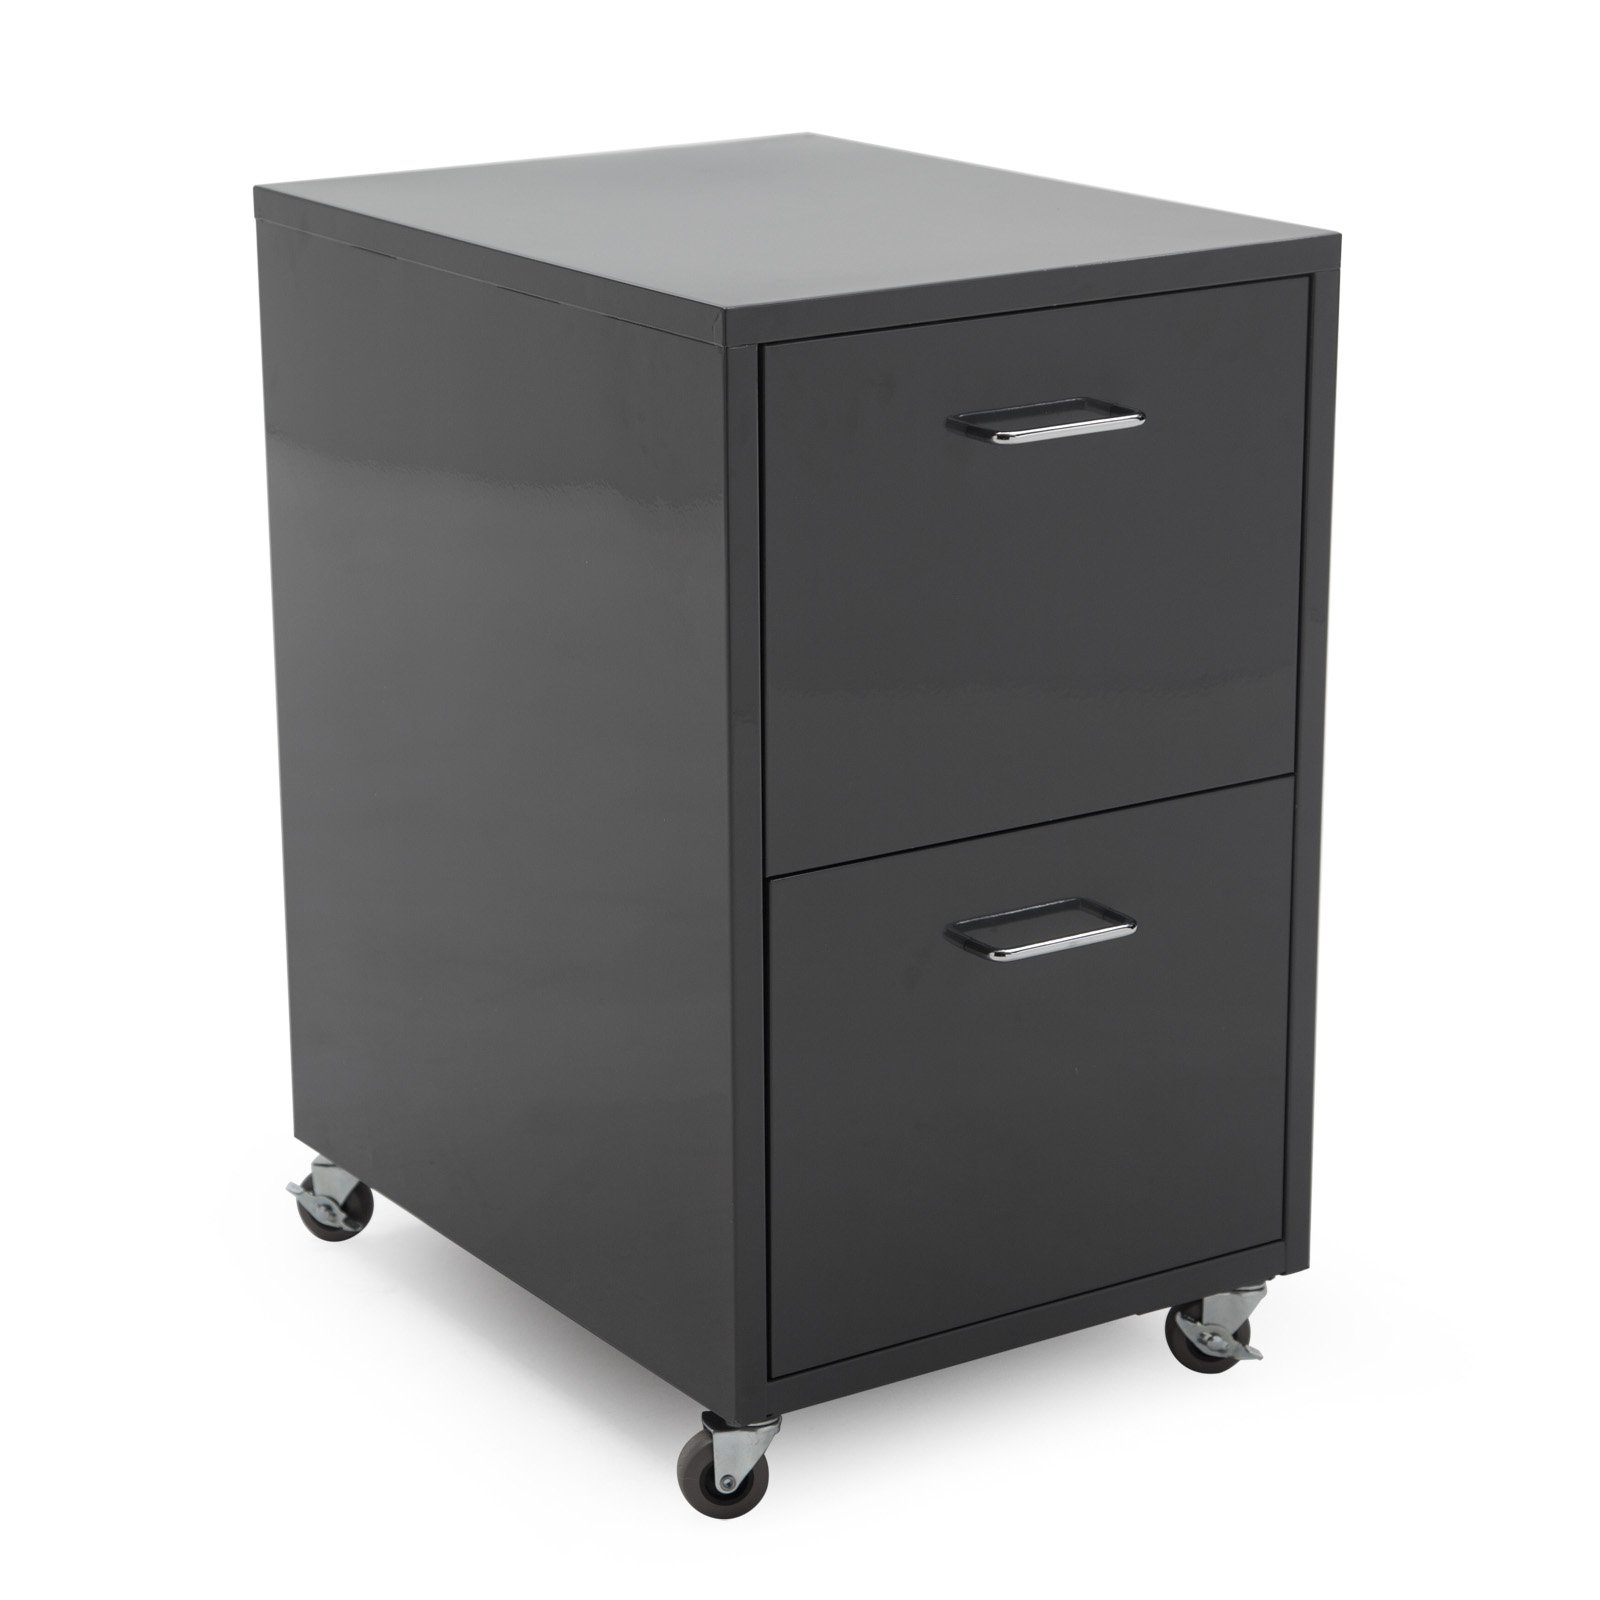 Maxwell Metal File Cabinet Walmart within size 1600 X 1600